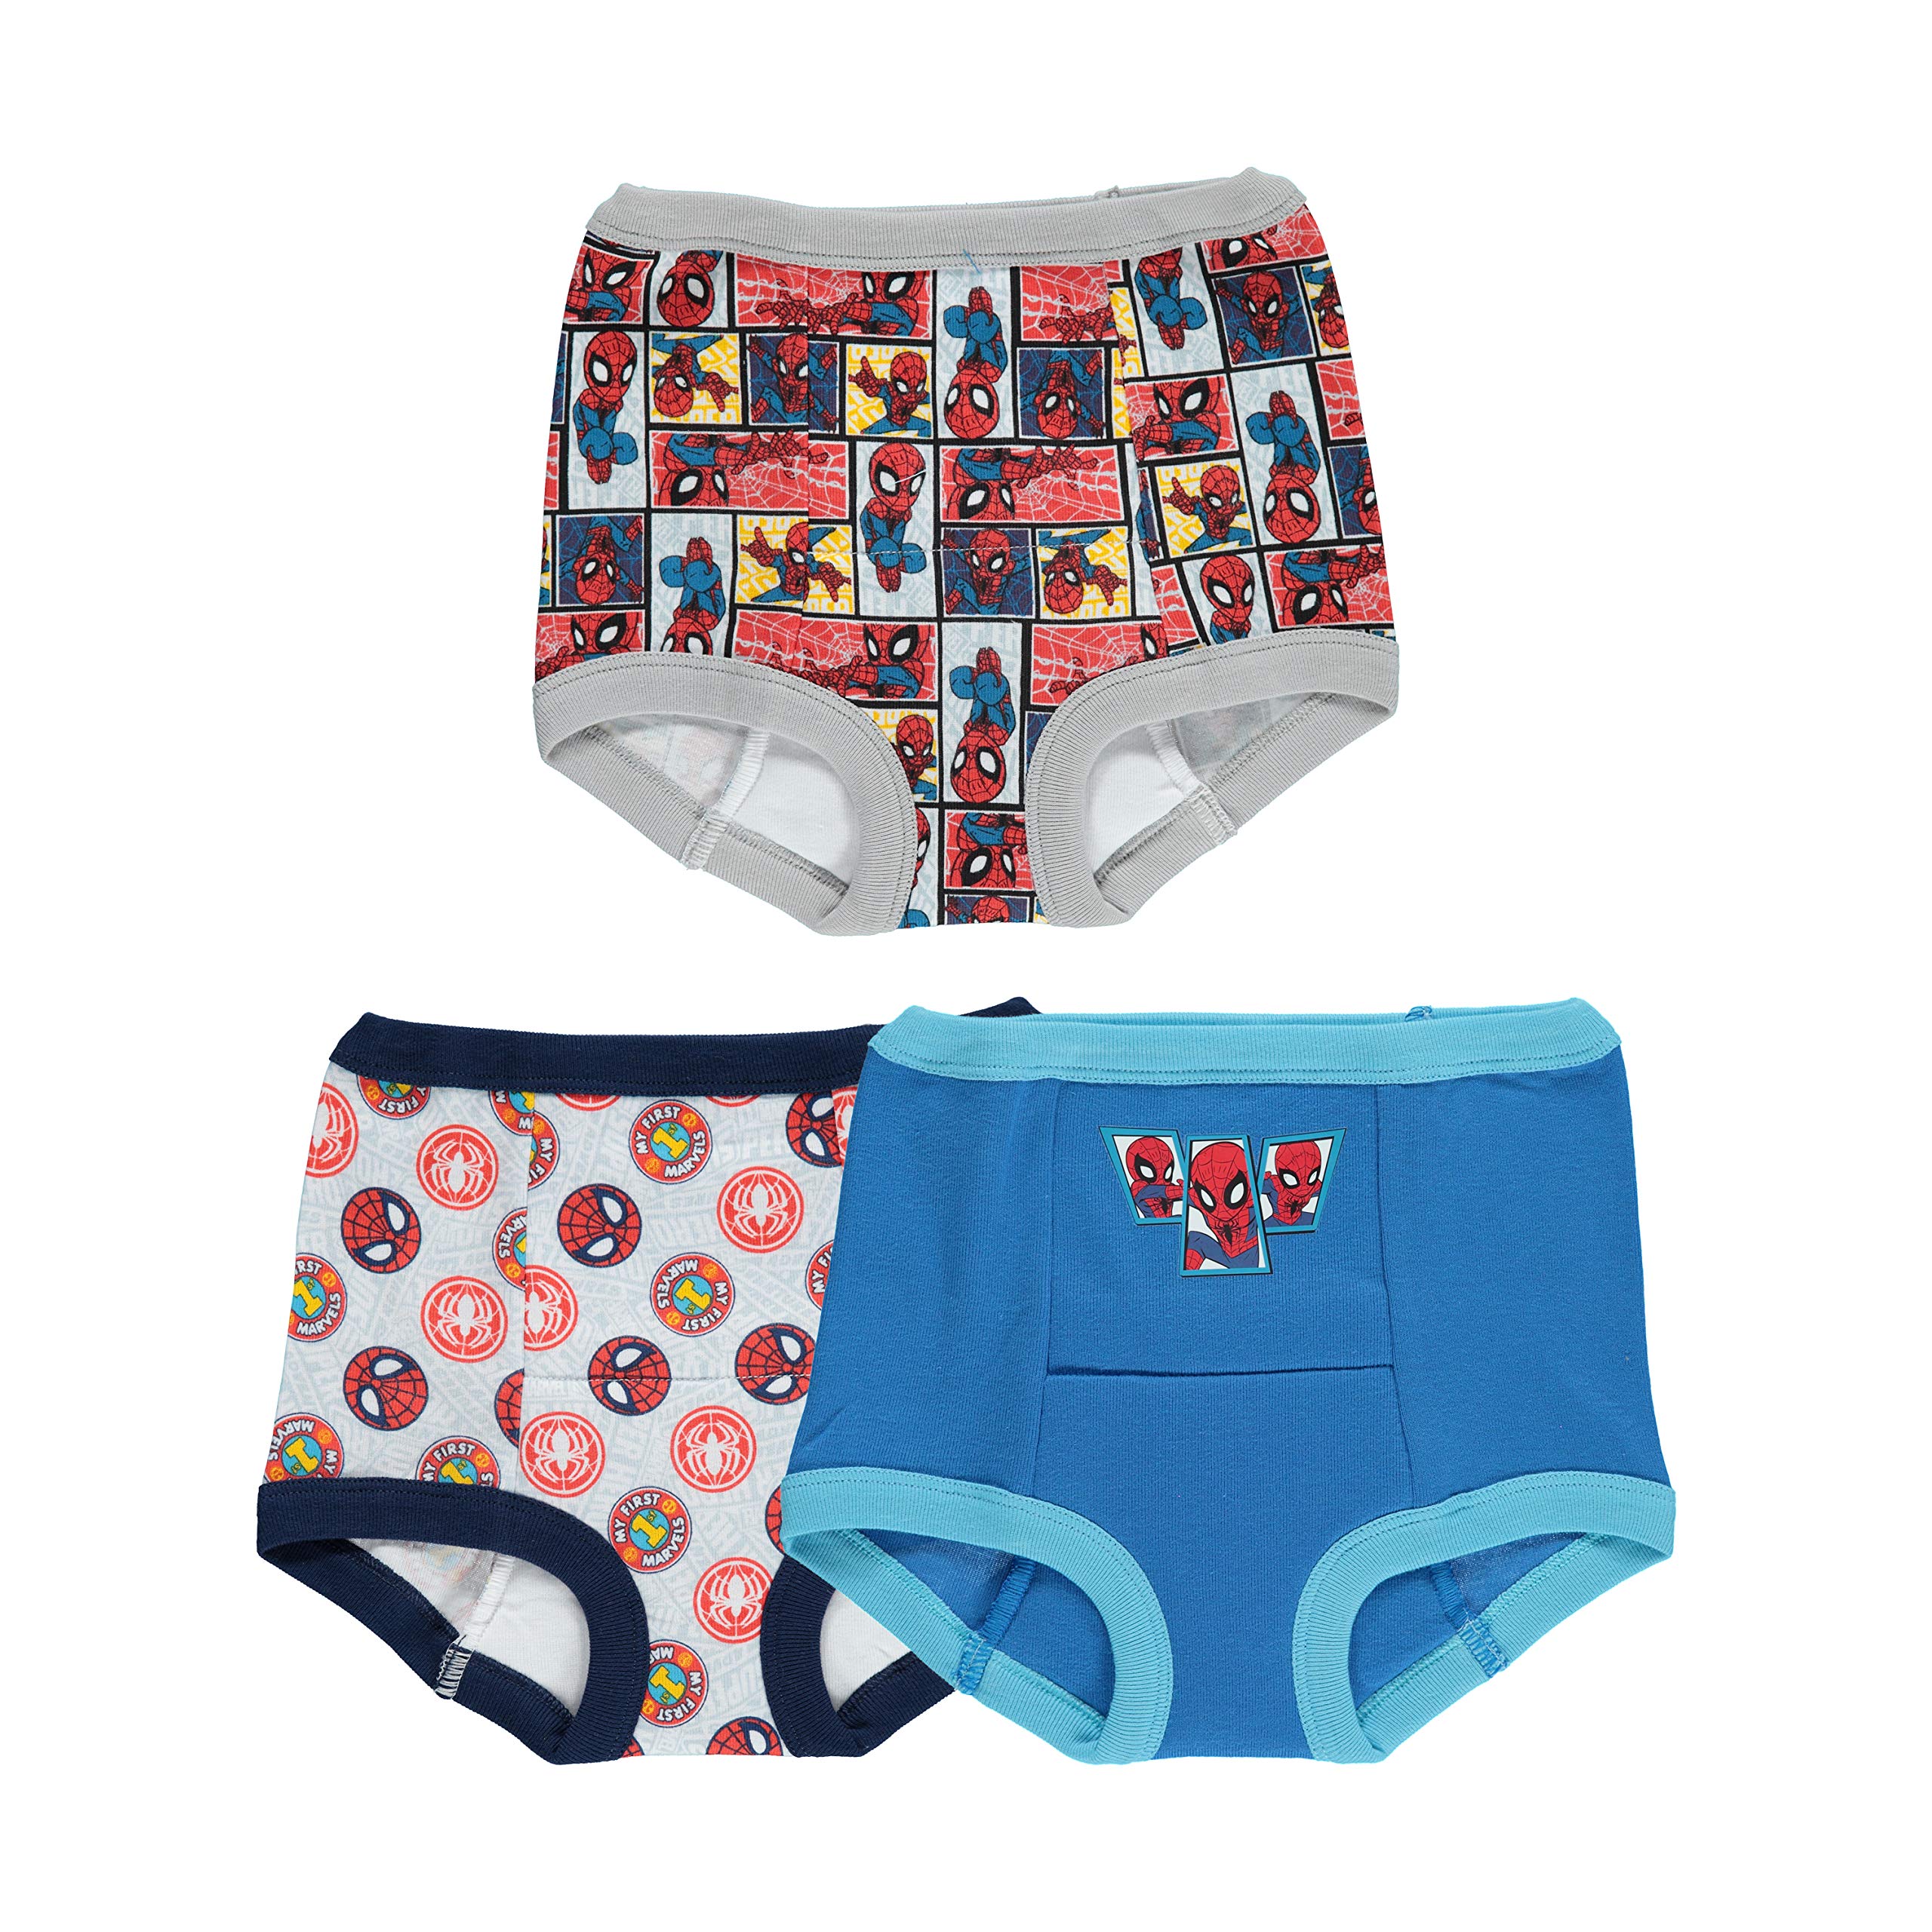 Spider-Man Unisex Baby Potty Training Pants Multipack Spidy 3 3T